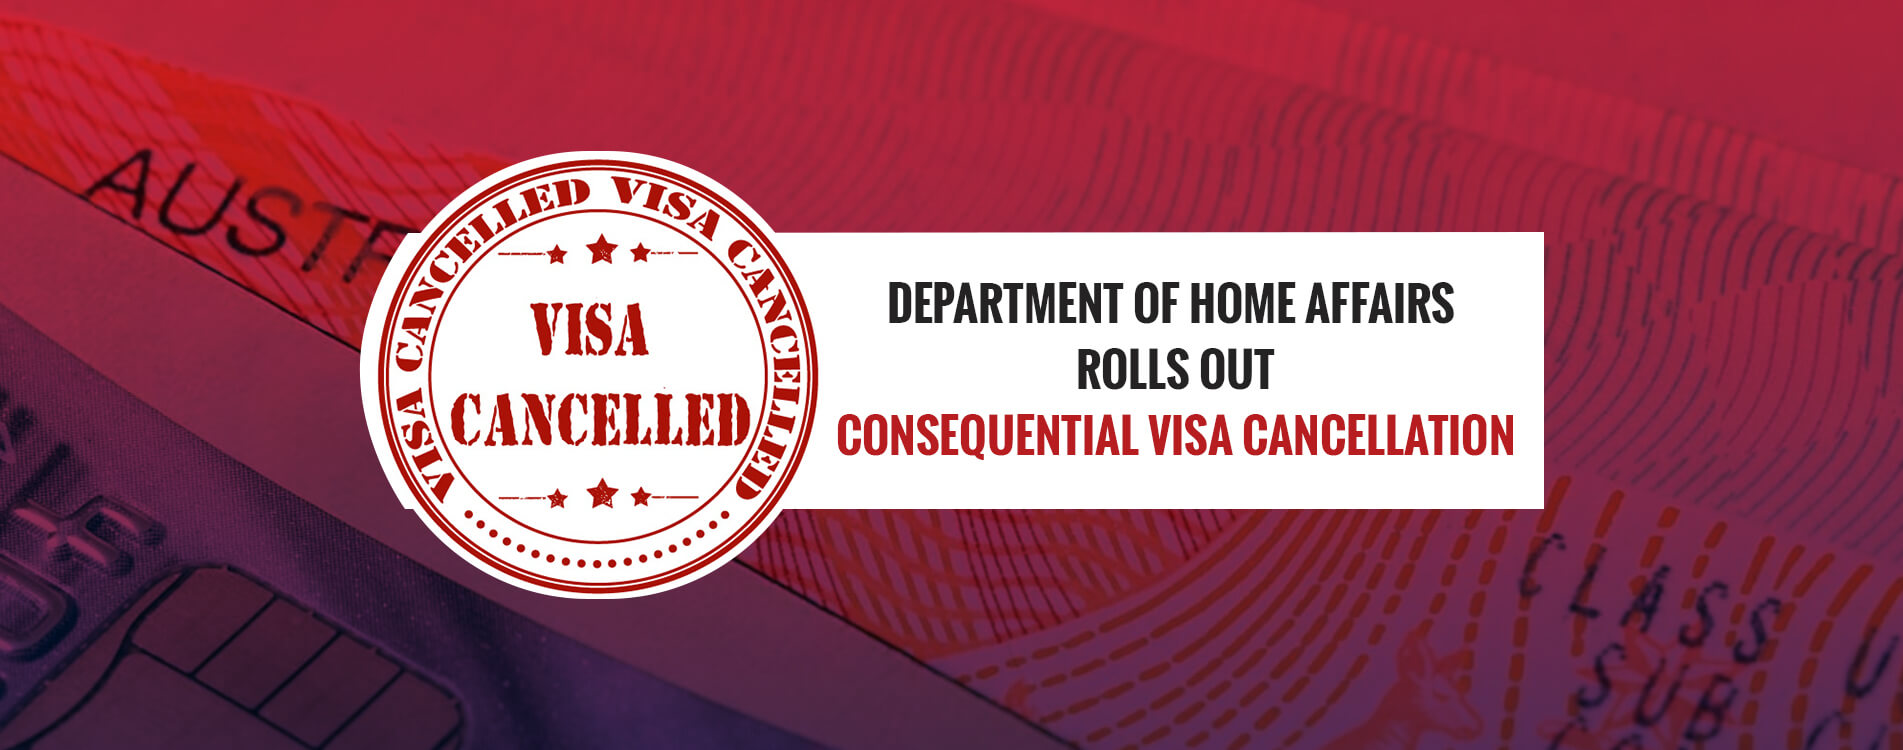 Department of Home Affairs Rolls Out Consequential Visa Cancellation